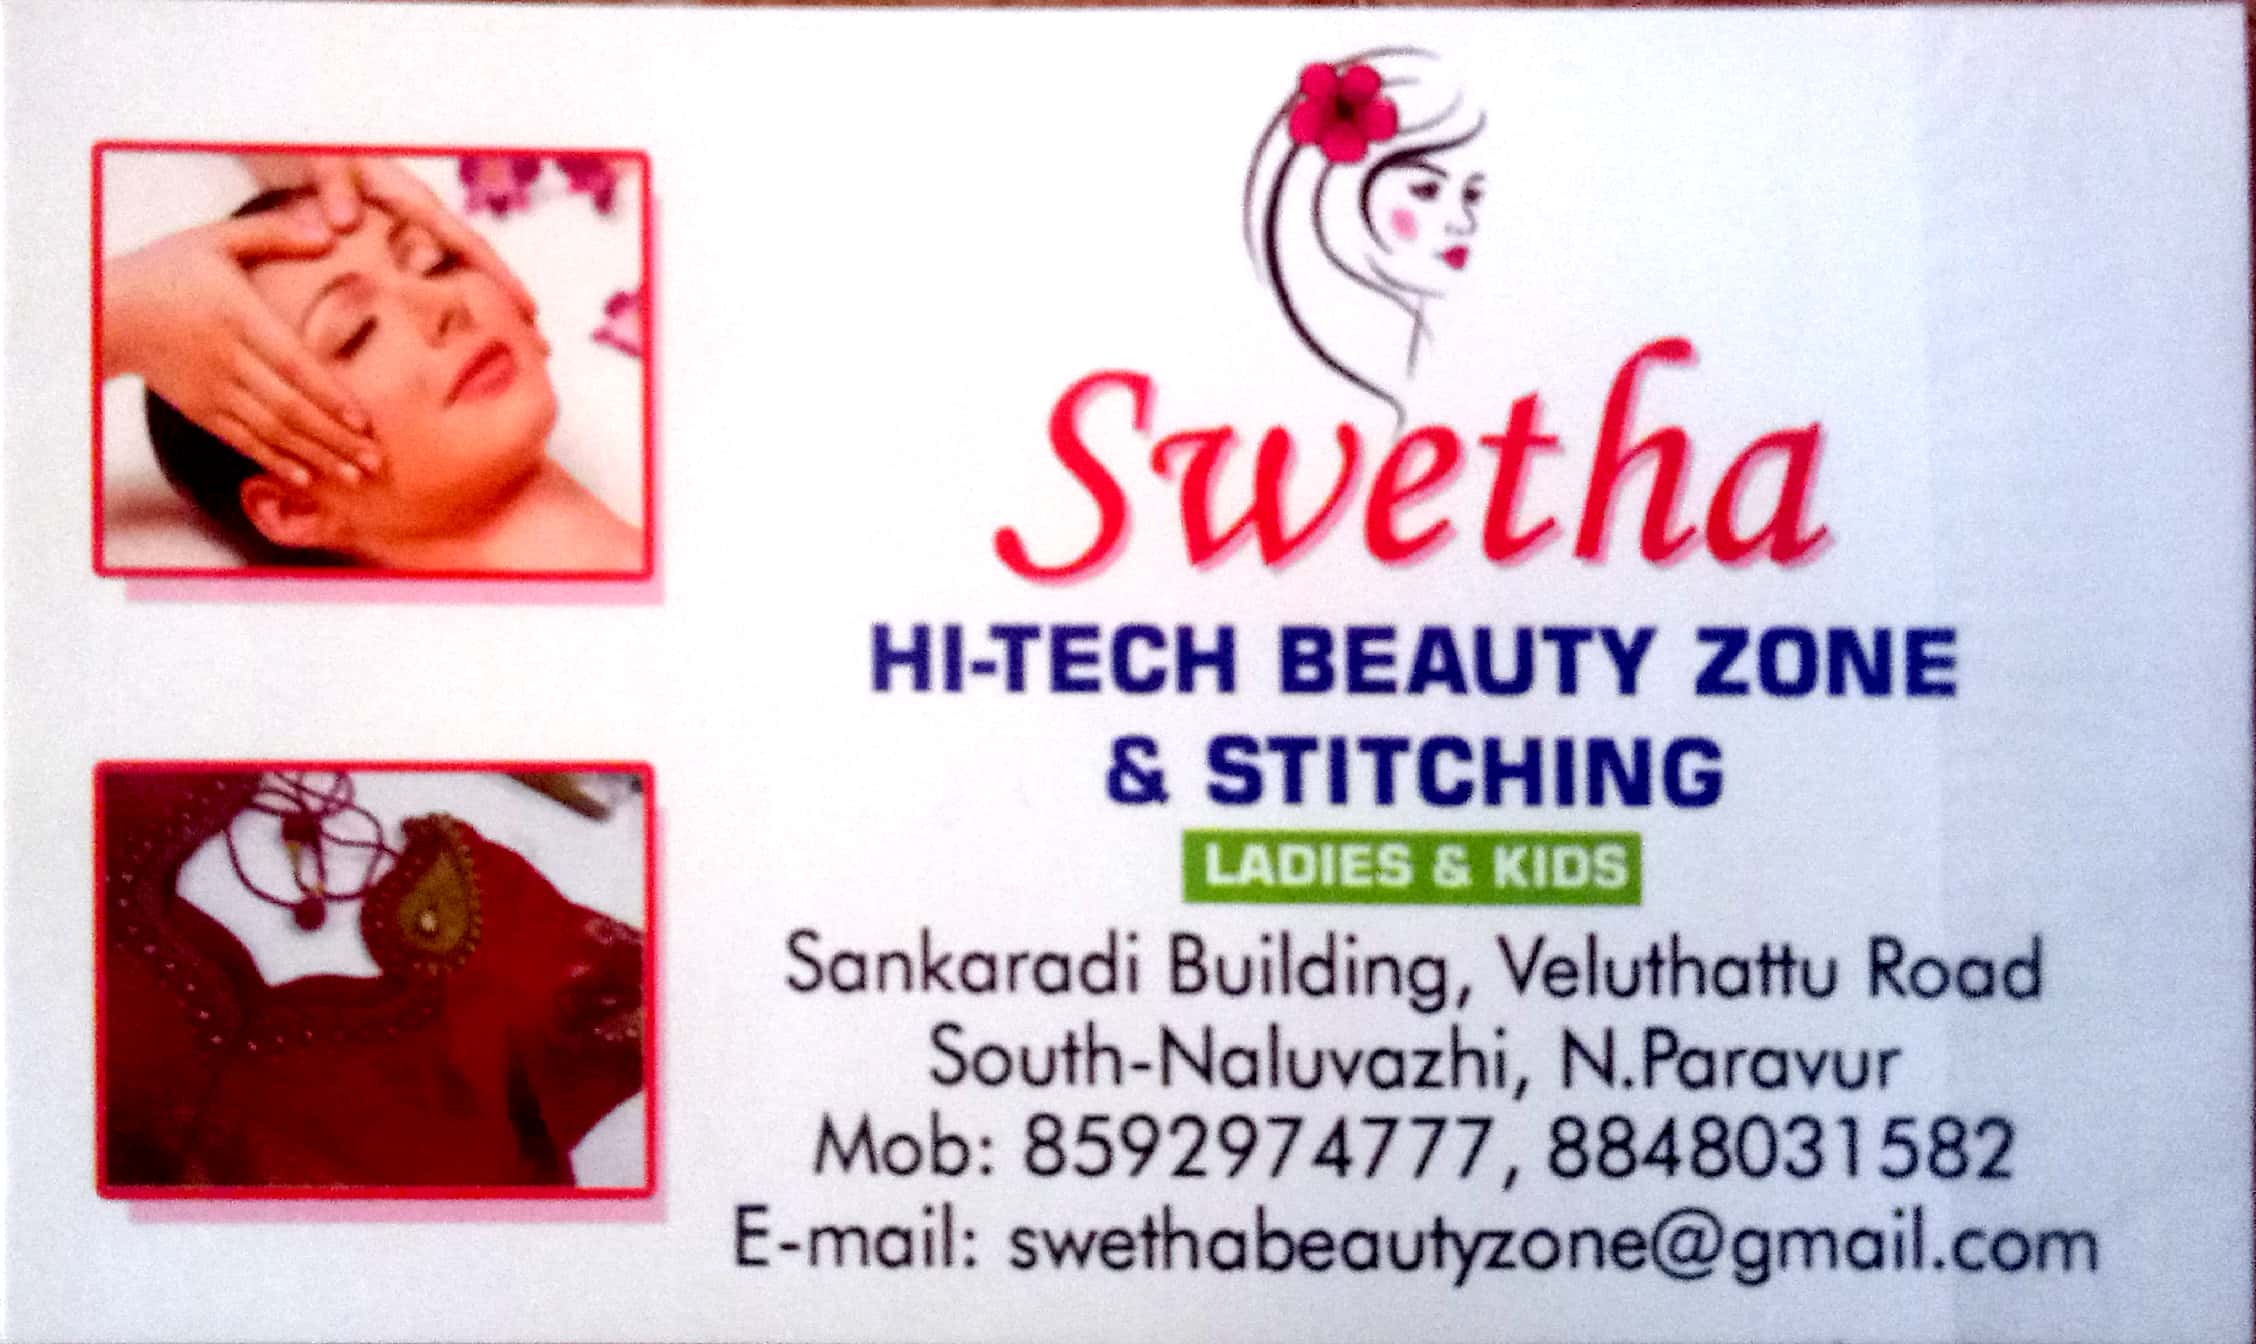 SWETHA HI - TECH BEAUTY ZONE NORTH PARAVOOR, BEAUTY PARLOUR,  service in North Paravur, Ernakulam